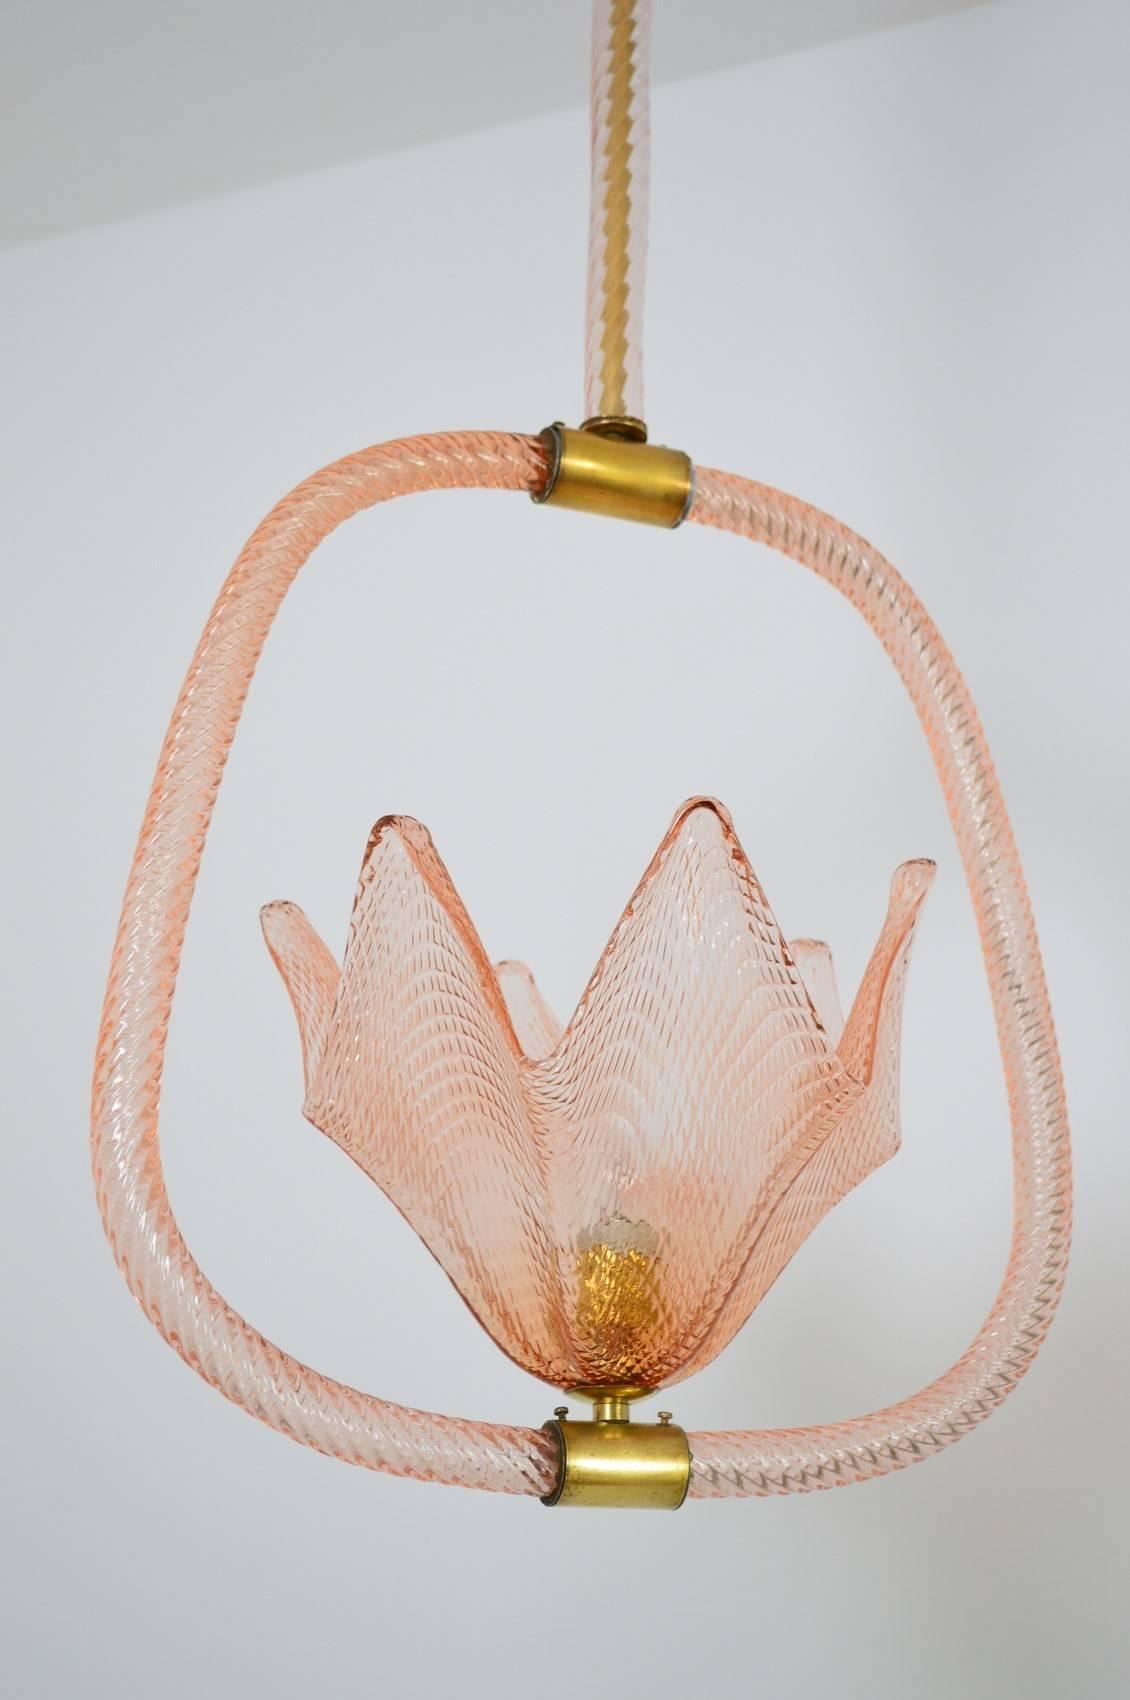 Beautiful pink Art Deco chandelier handcrafted by Ercole Barovier, Murano, Italy, 1940s.
This pink and gold chandelier, entirely handcrafted, with its large flower cup in the middle and the upper canopy, has been completely restored and cleaned